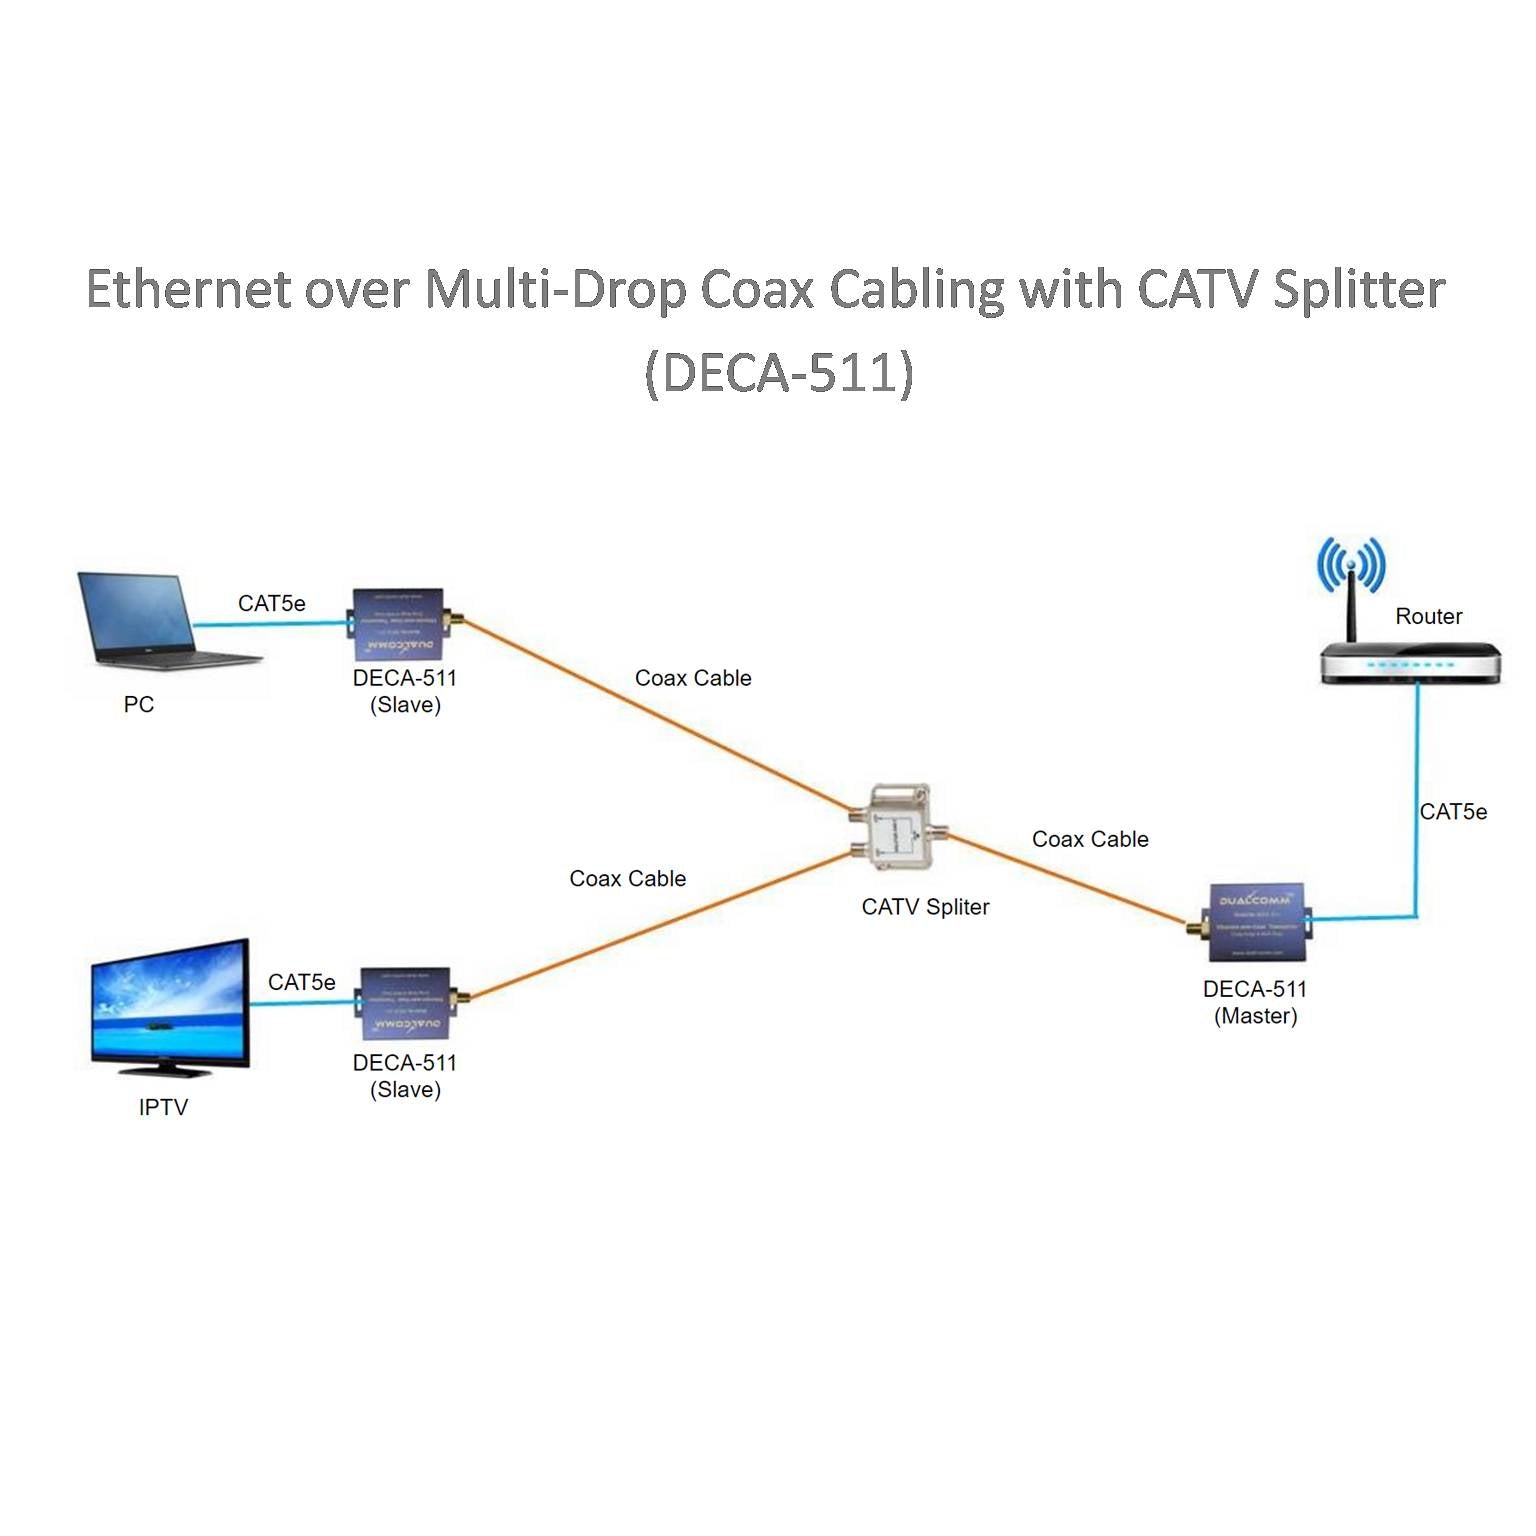 Ethernet-over-Coax Switch w/ PoE Pass-Through – Dualcomm